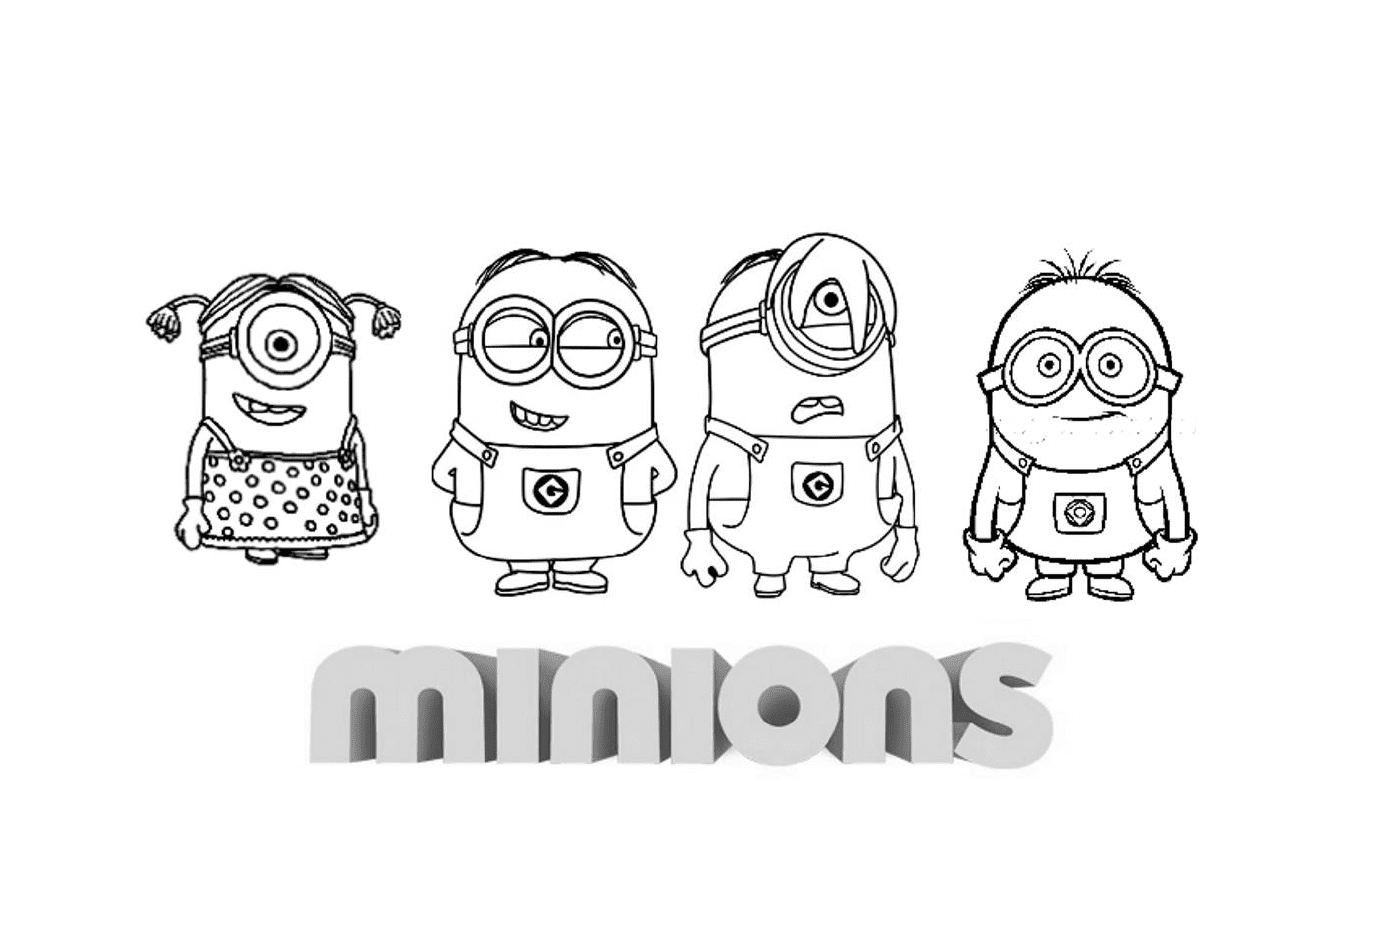  Small family minion, characters in row 